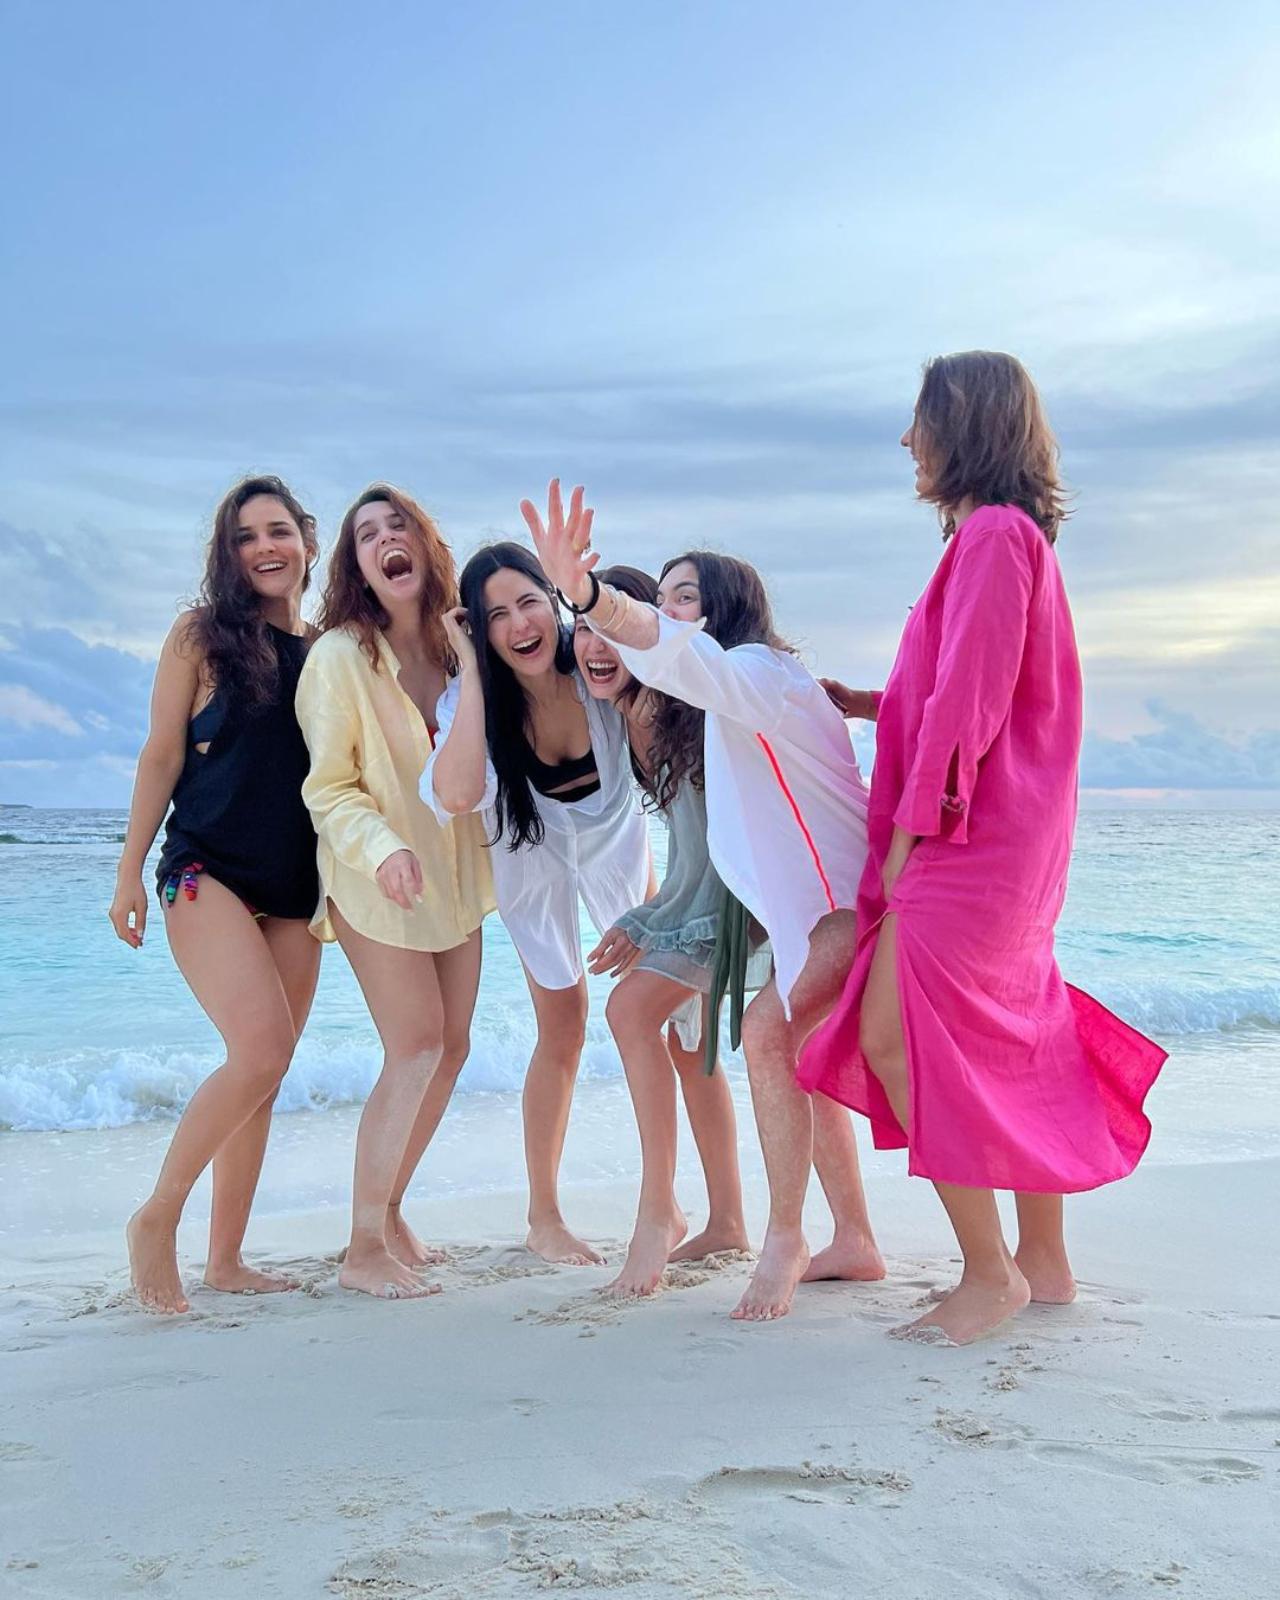 If the pictures are to go by, Katrina sure had a blast with her girl gang which included Isabelle Kaif, Sharvari Wagh, Angira Dhar, and Ileana D'Cruz. The girls posed happily in their beach wear in the background of a pristine beach